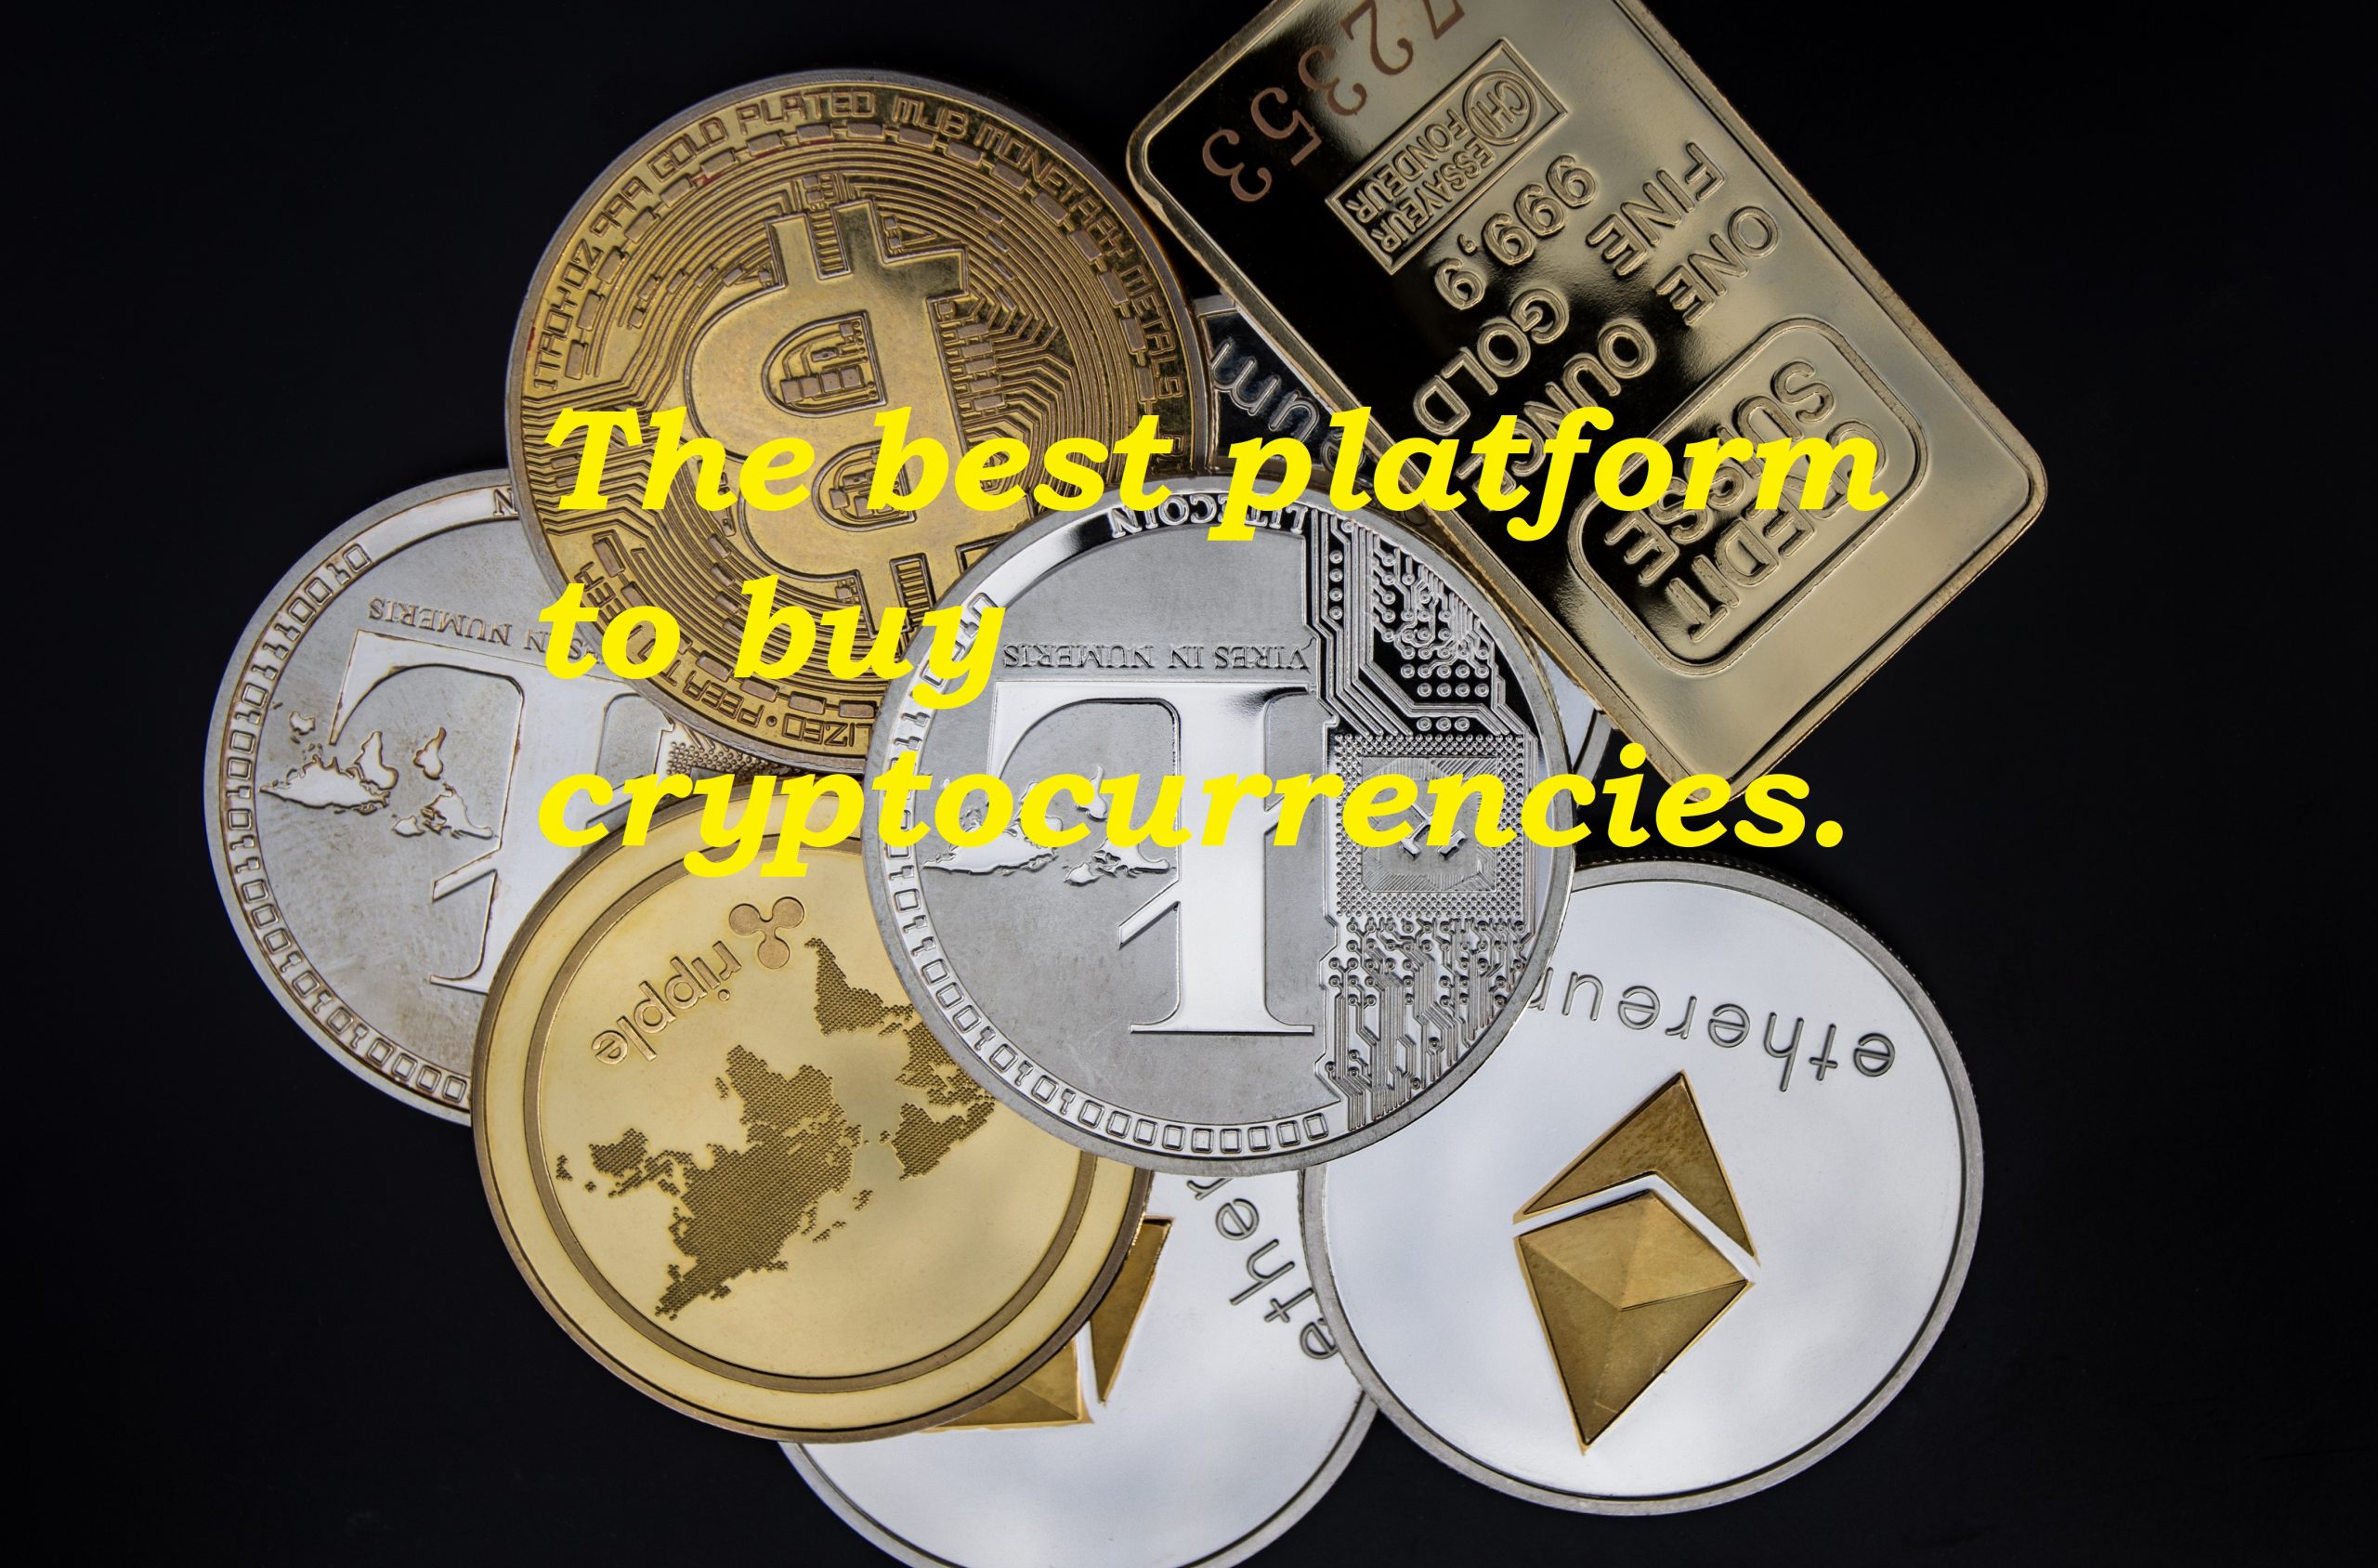 The best platform to buy cryptocurrencies. - the product test